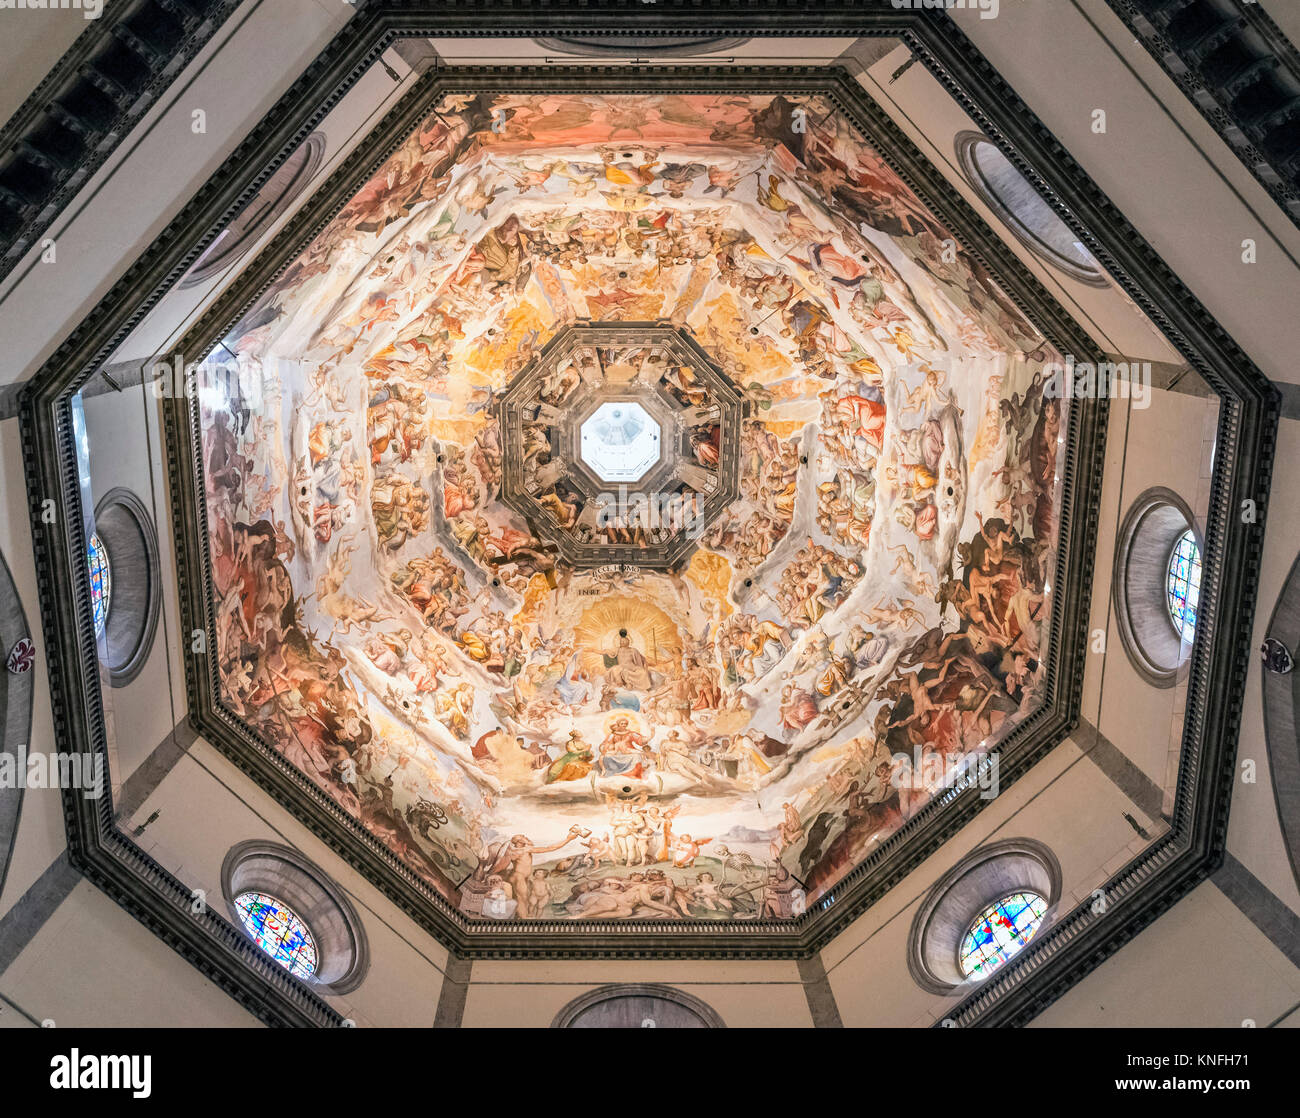 Dome of the cathedral showing the Fresco of the Last Judgment by Vasari and Zuccari, Duomo, Florence, Italy. Stock Photo